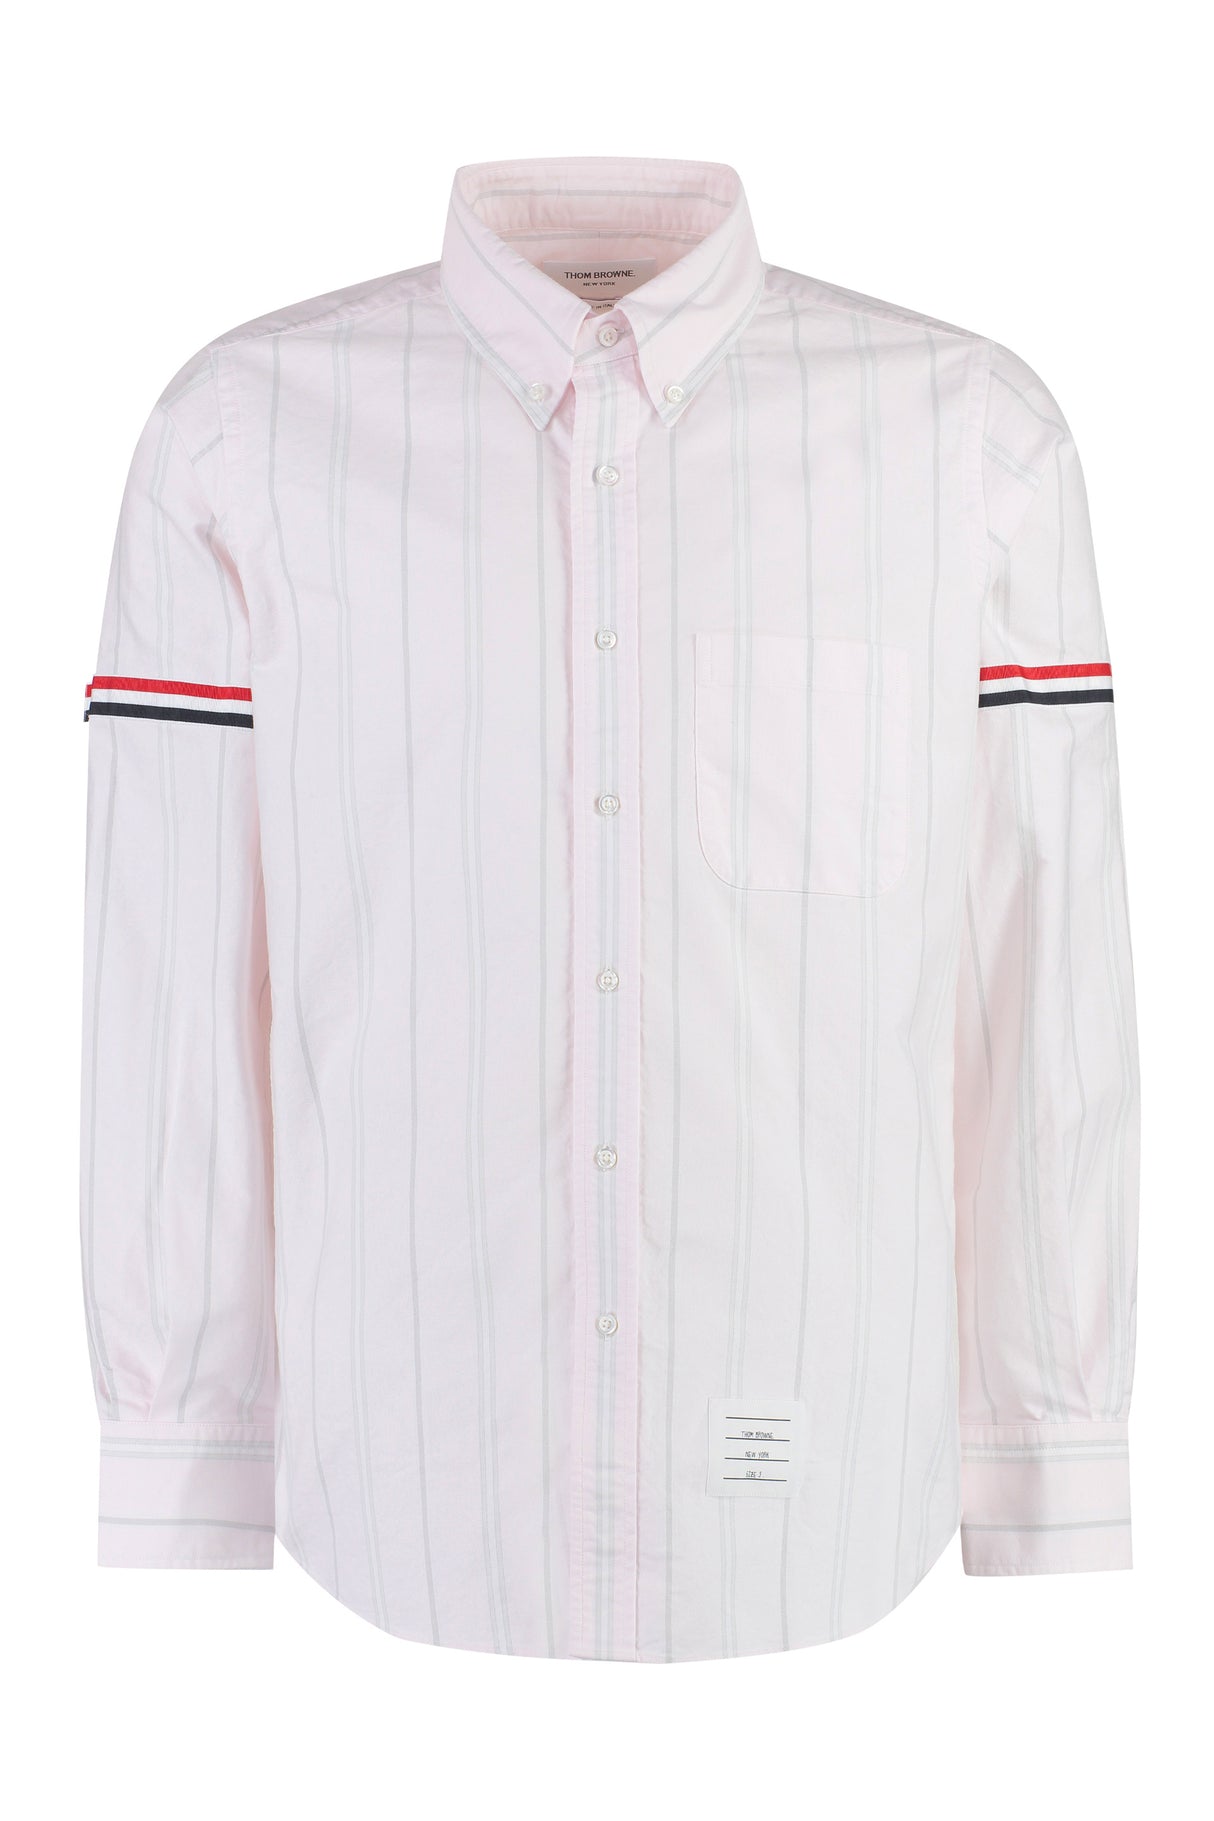 THOM BROWNE Tricolor Striped Cotton Shirt for Men - FW23 Collection